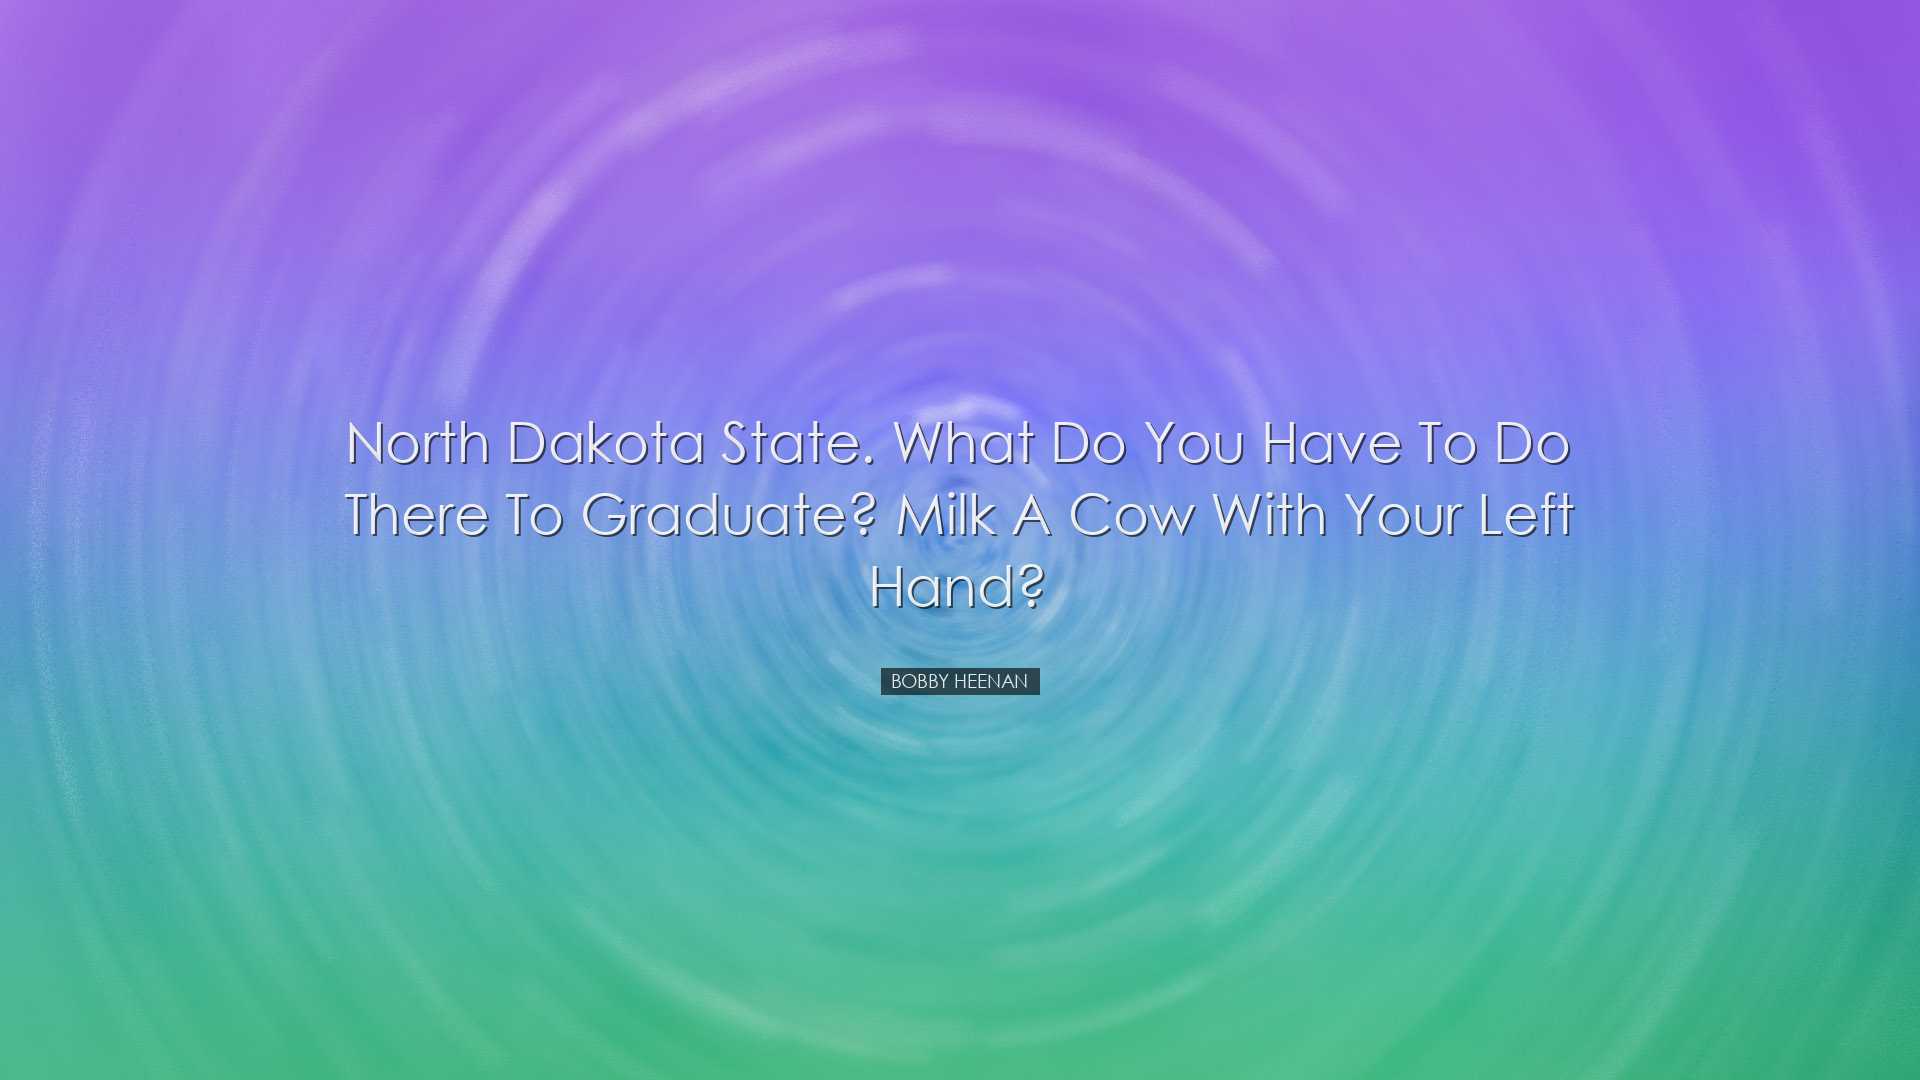 North Dakota State. What do you have to do there to graduate? Milk